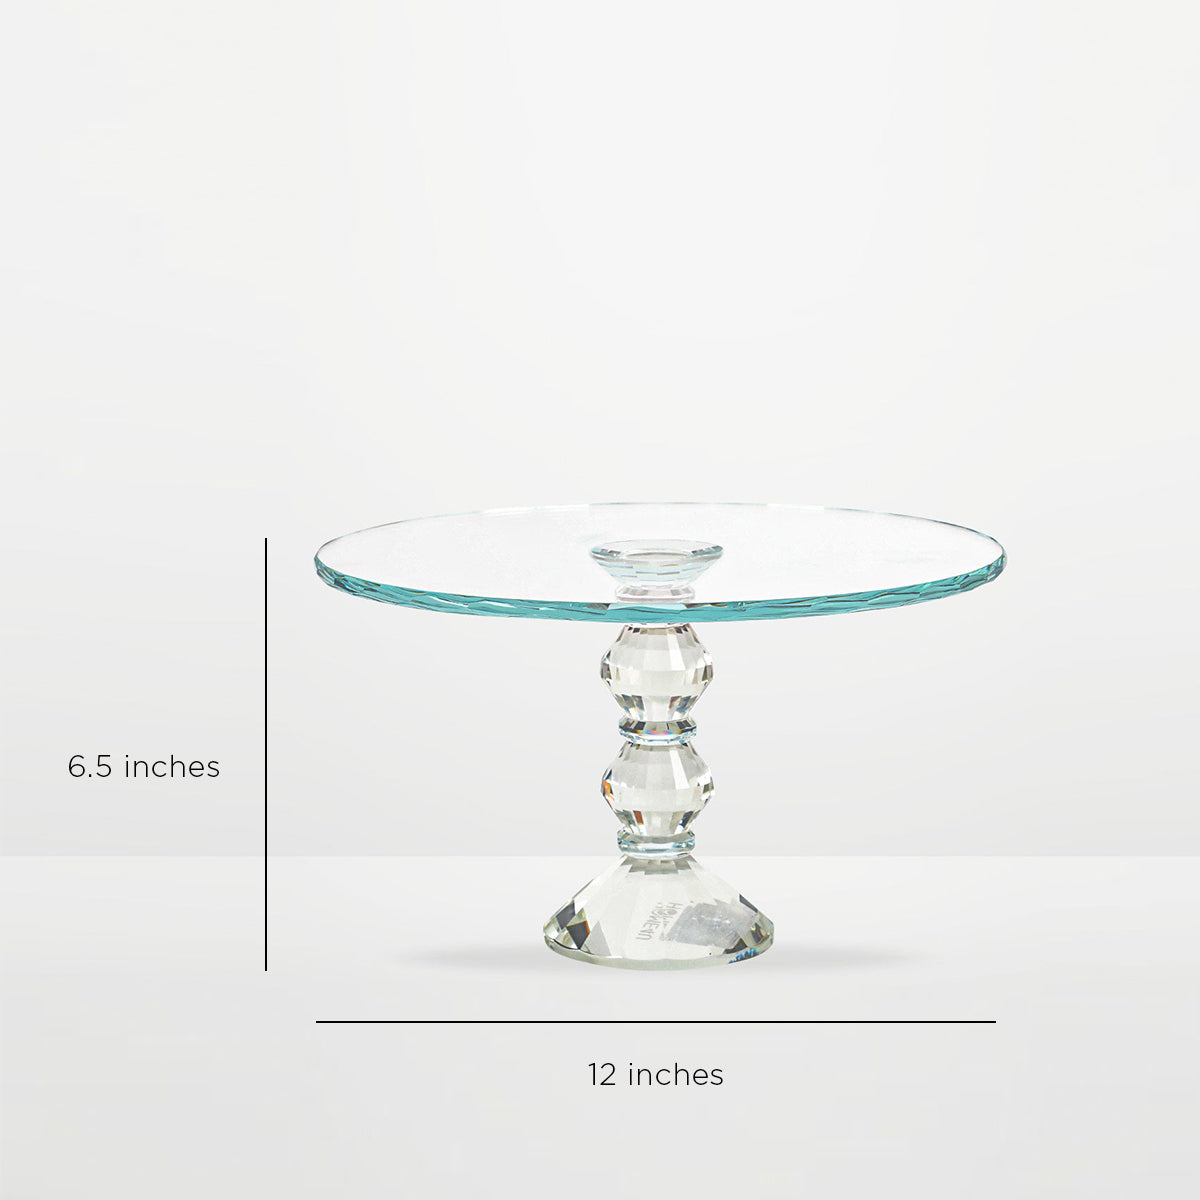 Cake stand with crystal hanging detail - Weddings of Distinction